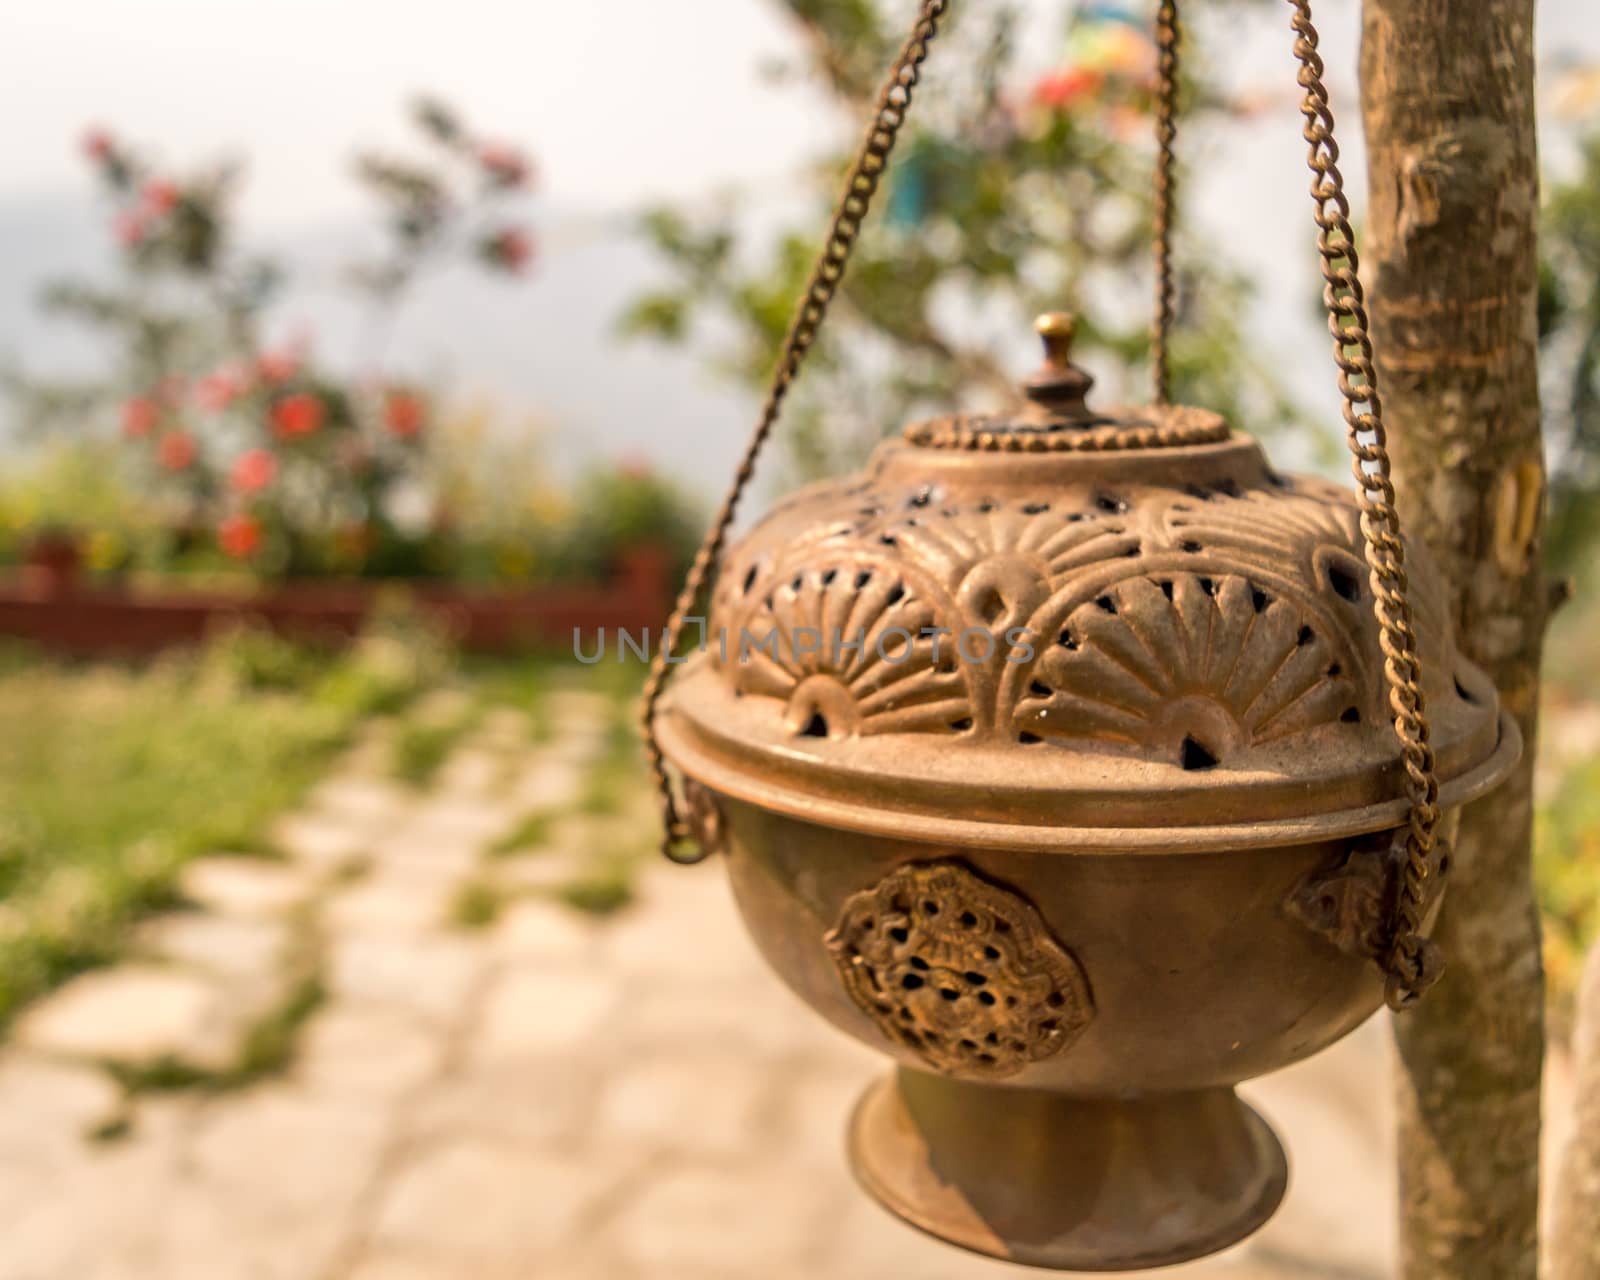 Metal Dhoop Batti Stand Hanging on a tree branch